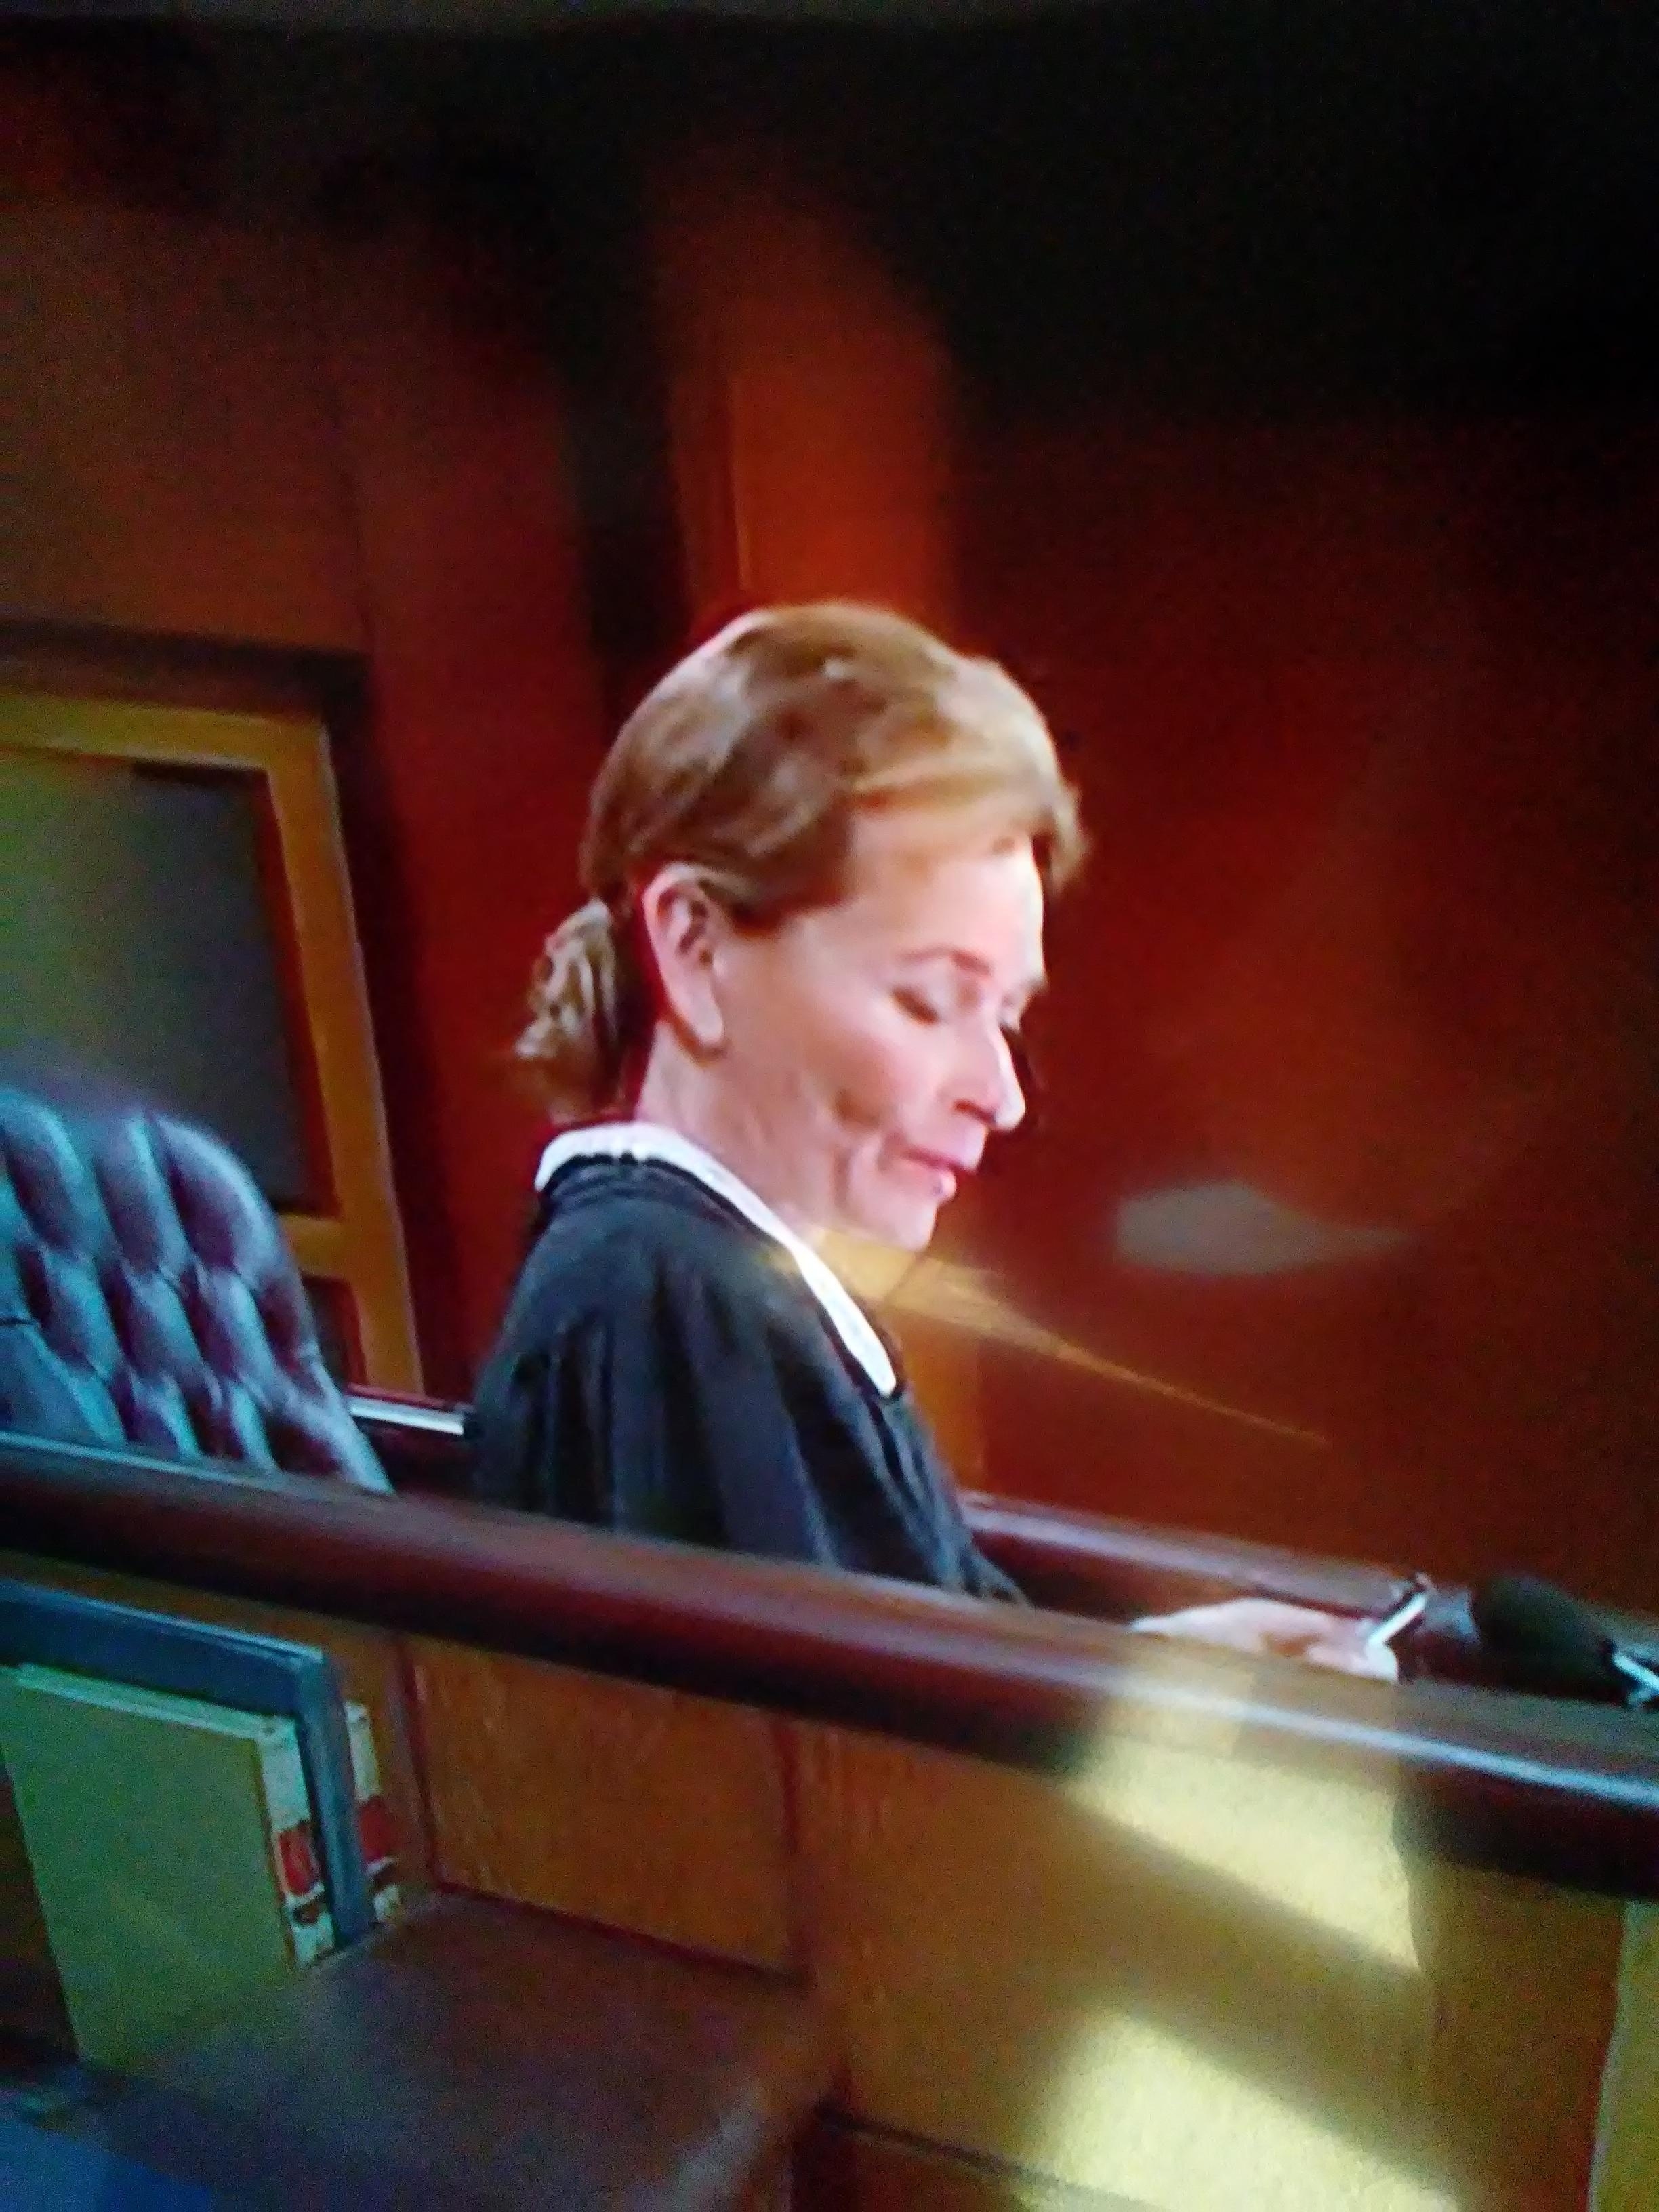 What Happened To The Iconic Hair? What Is This Ponytail regarding Judge Judy Longer Hair